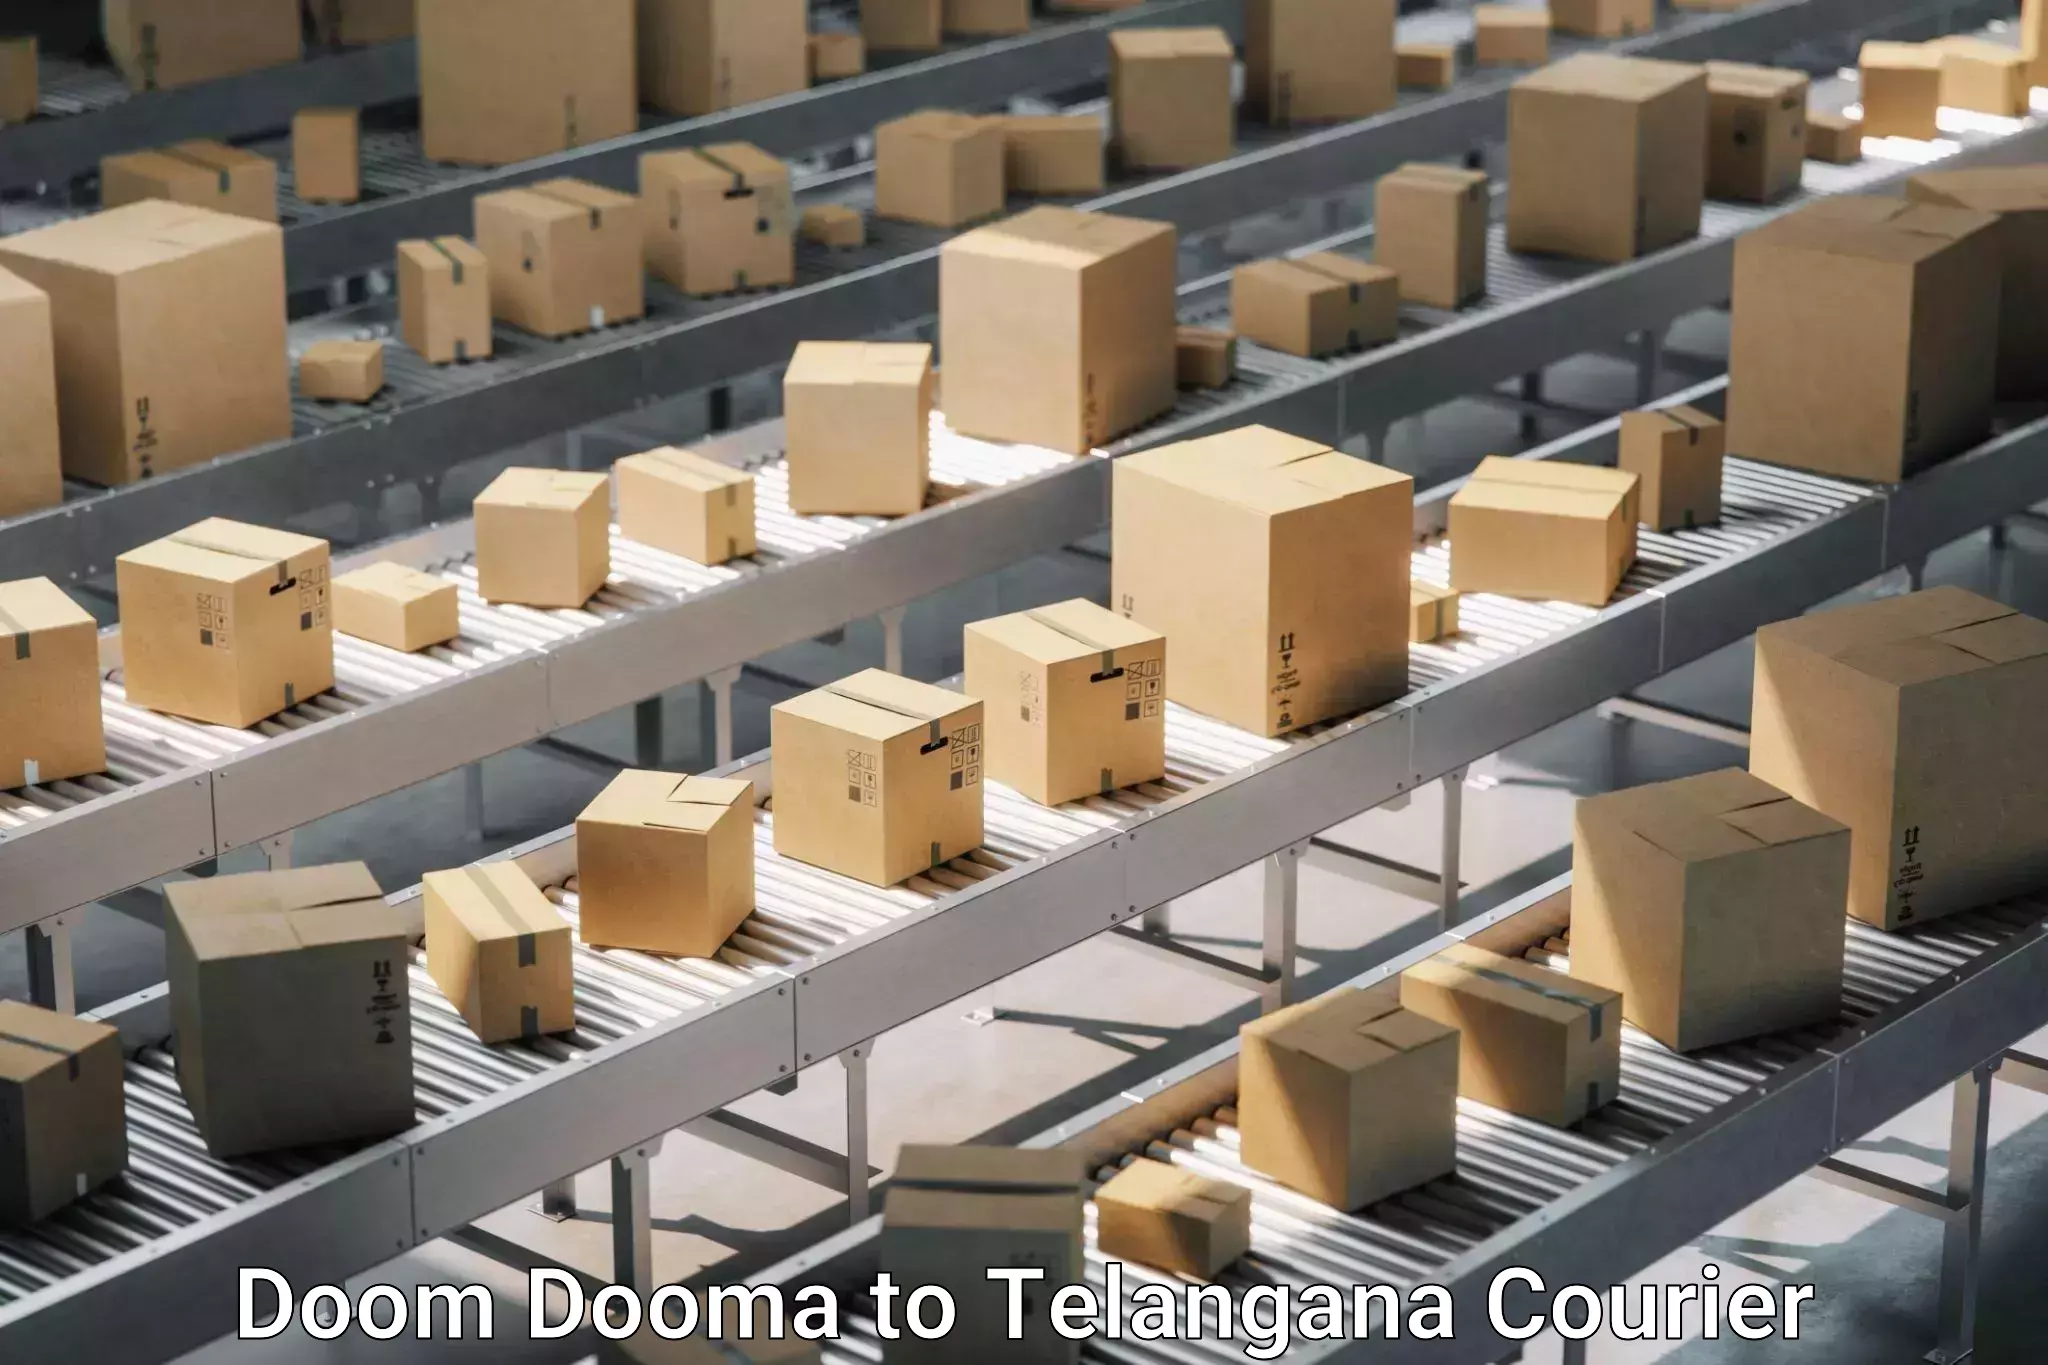 Furniture delivery service Doom Dooma to Vemulawada